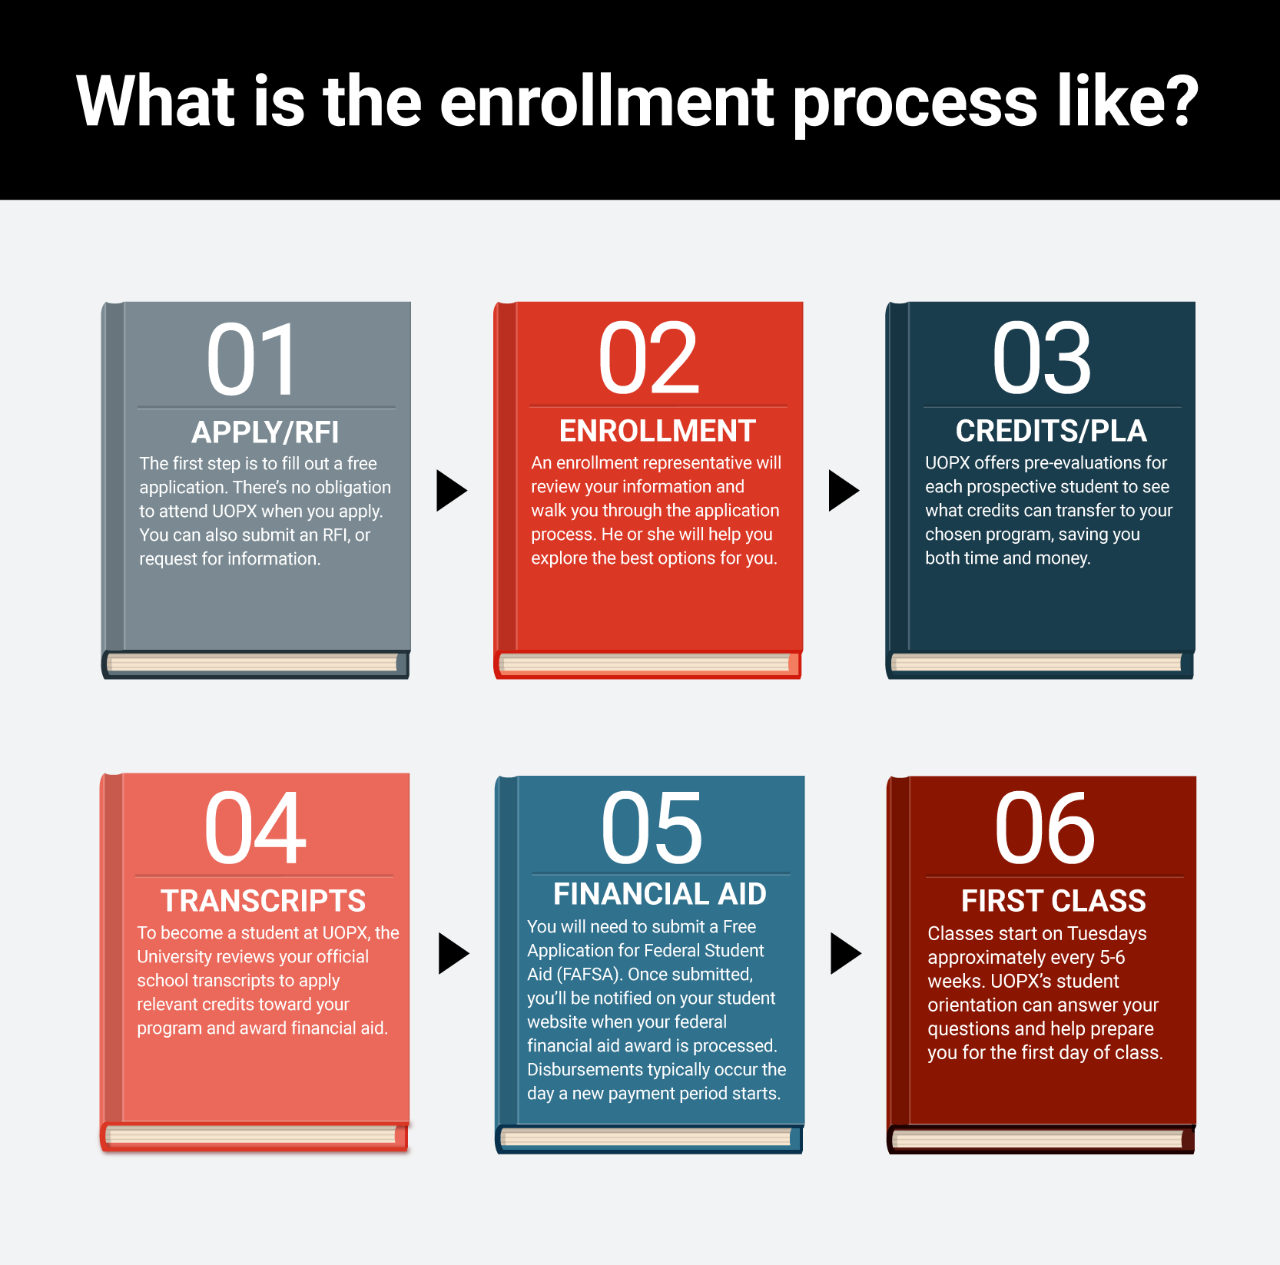 what is the enrollment process like?